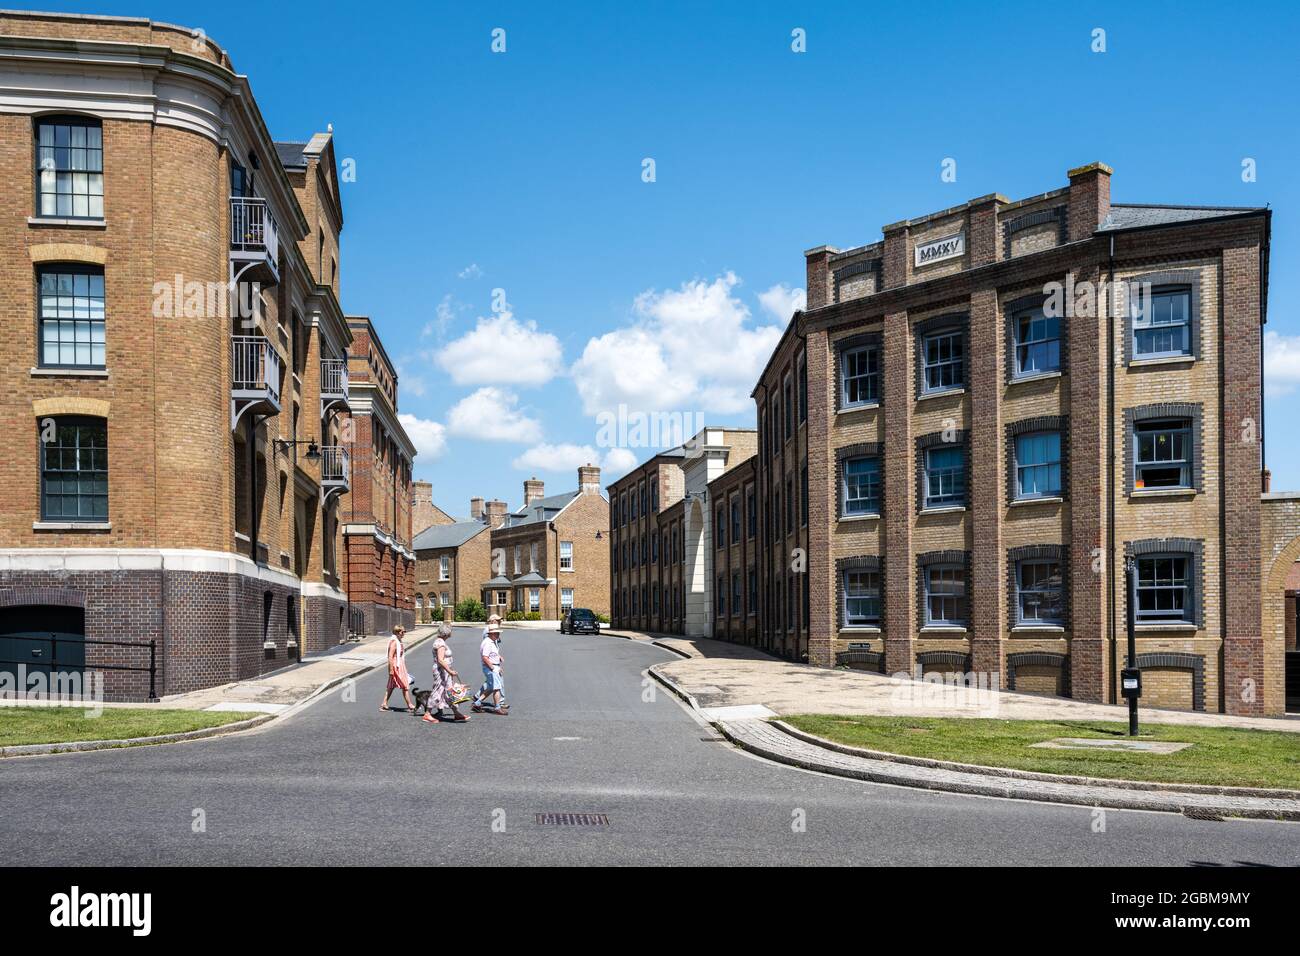 Pedestrians walk past new build houses and apartment buildings inspired by Georgian and Victorian architecture in Poundbury new town in Dorset. Stock Photo